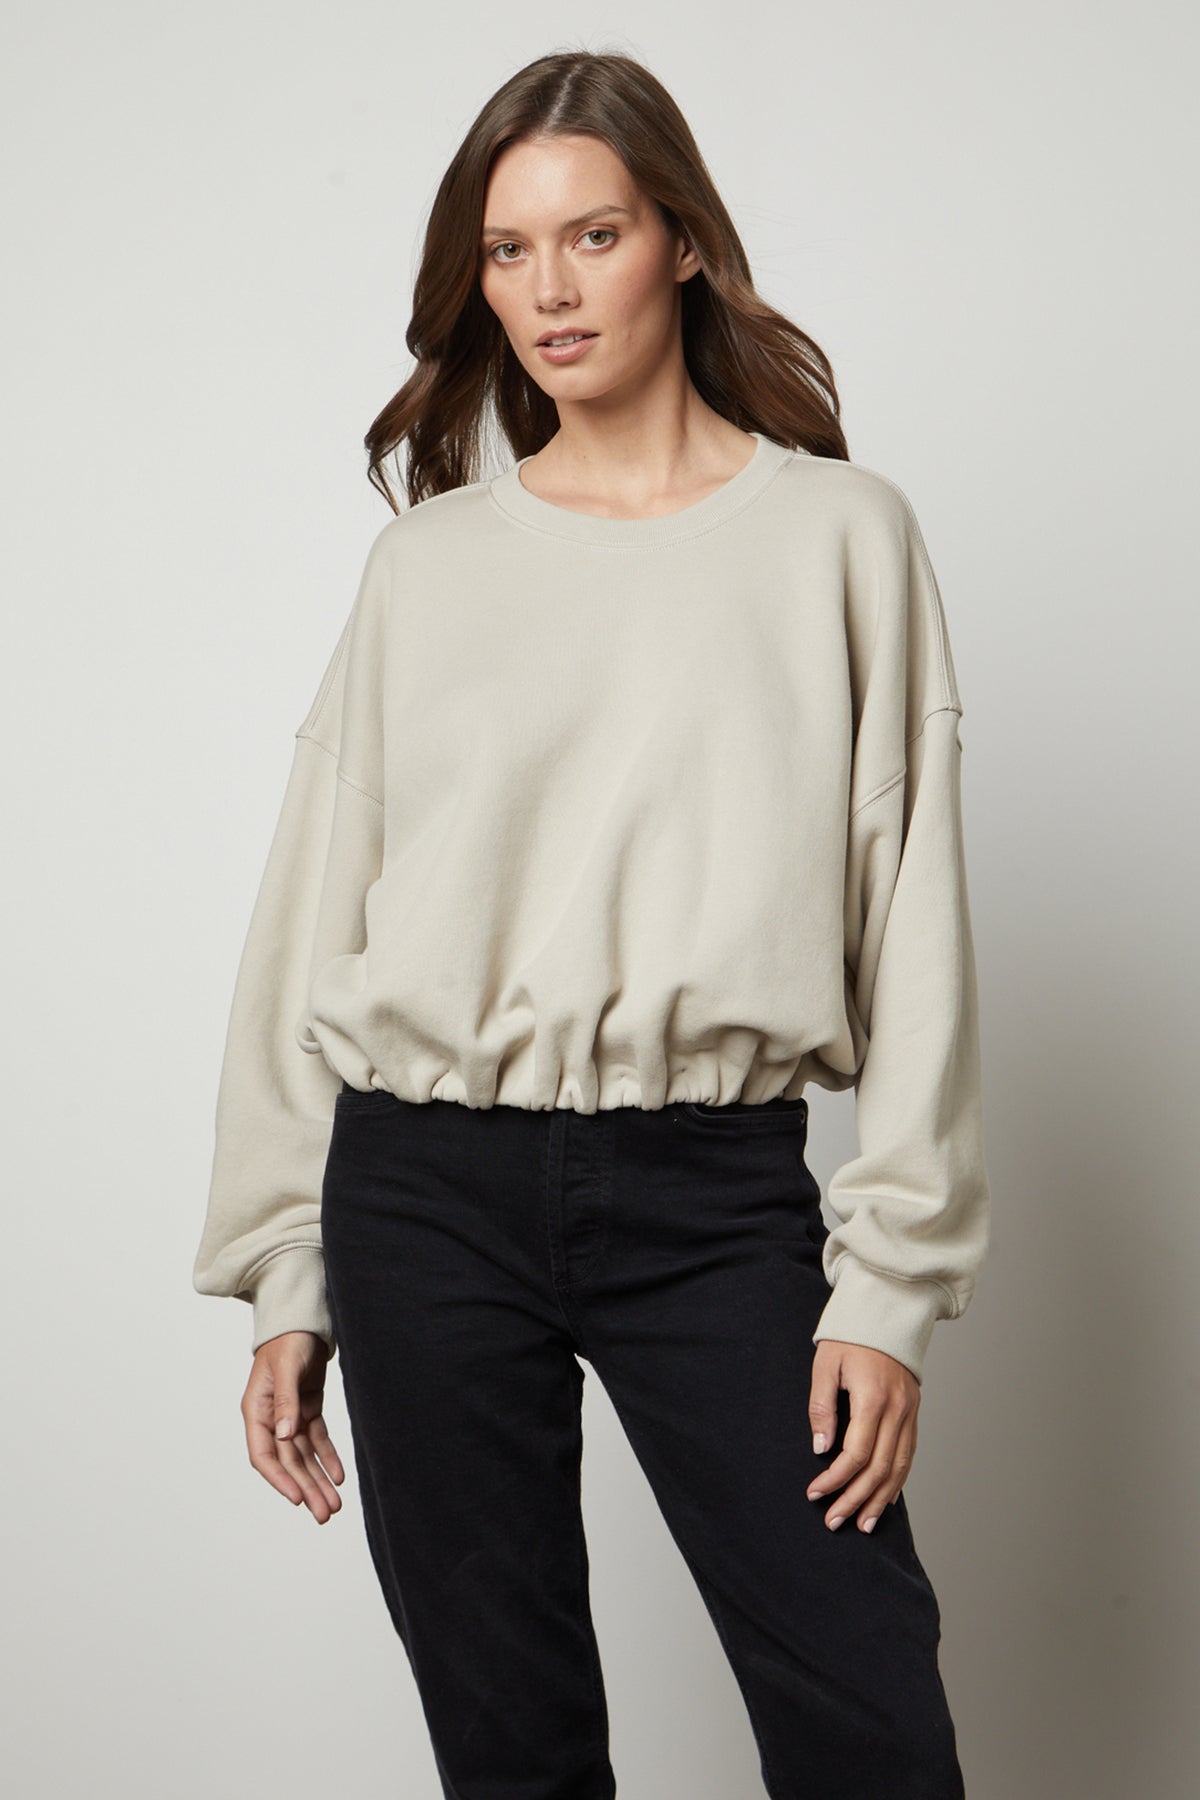   The versatile model is wearing a Velvet by Graham & Spencer BOBBI CROPPED SWEATSHIRT in a beige color and black jeans. 